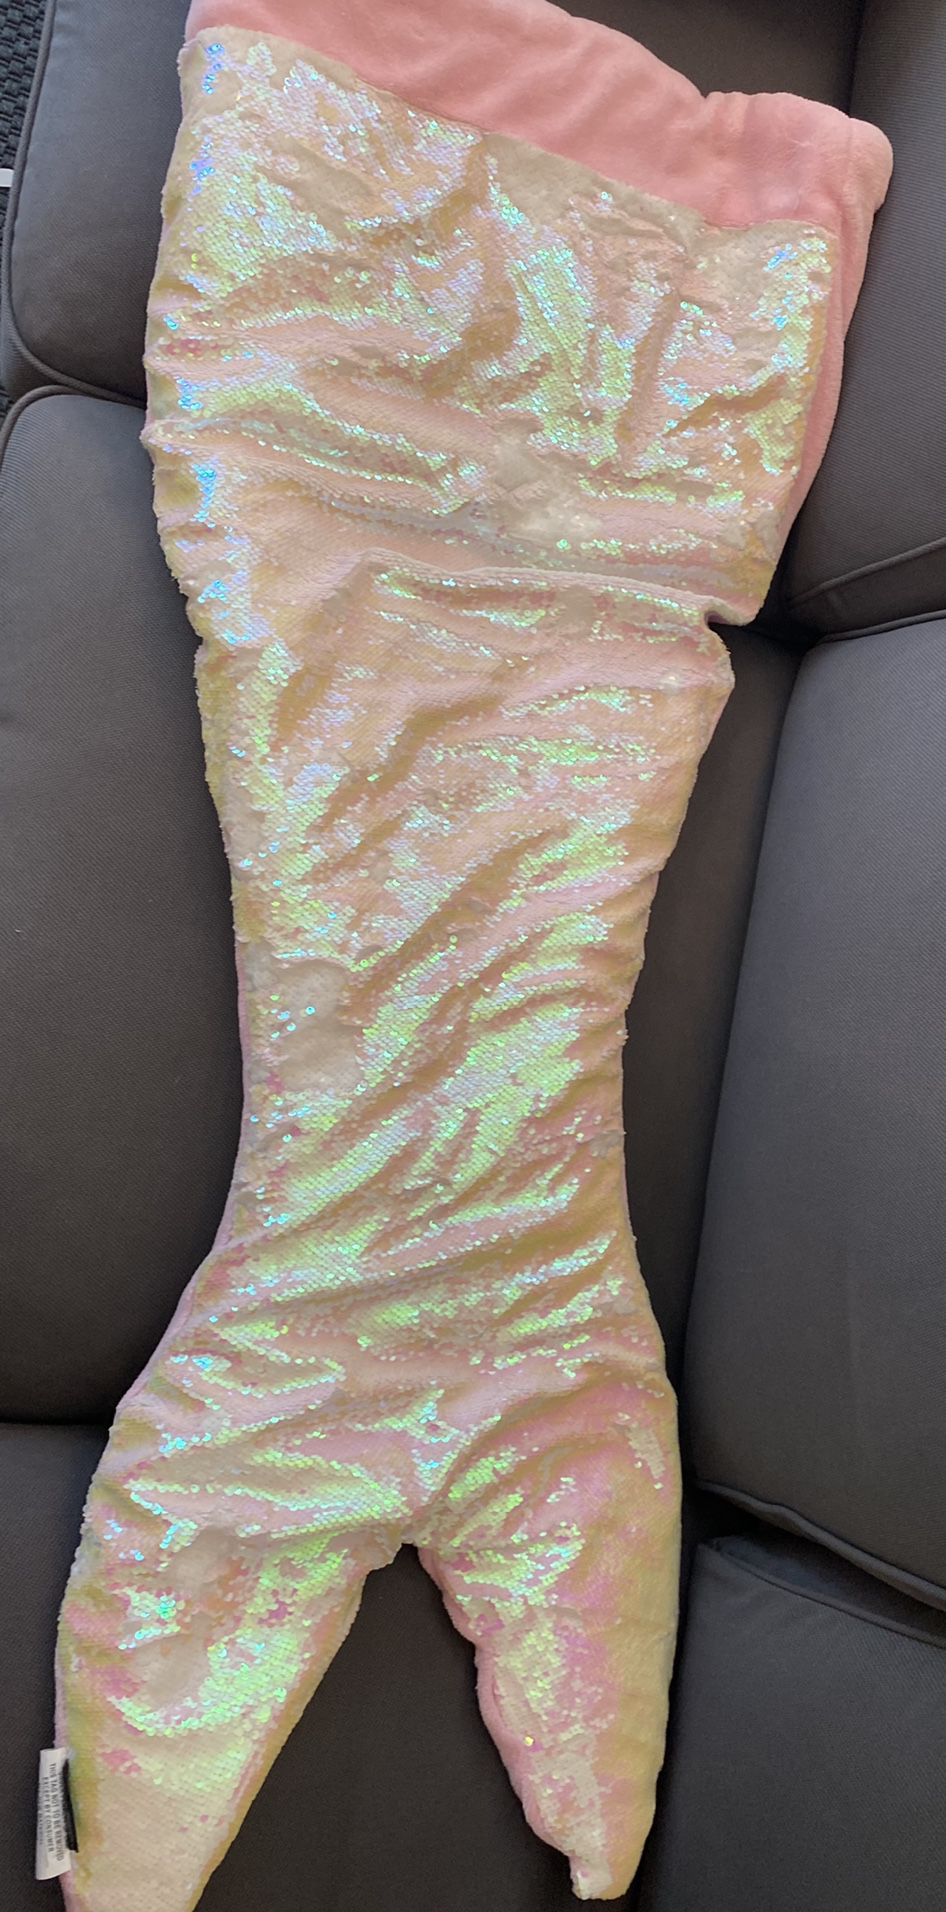 Cynthia Rowley Mermaid Tail Blanket in Very Good Condition